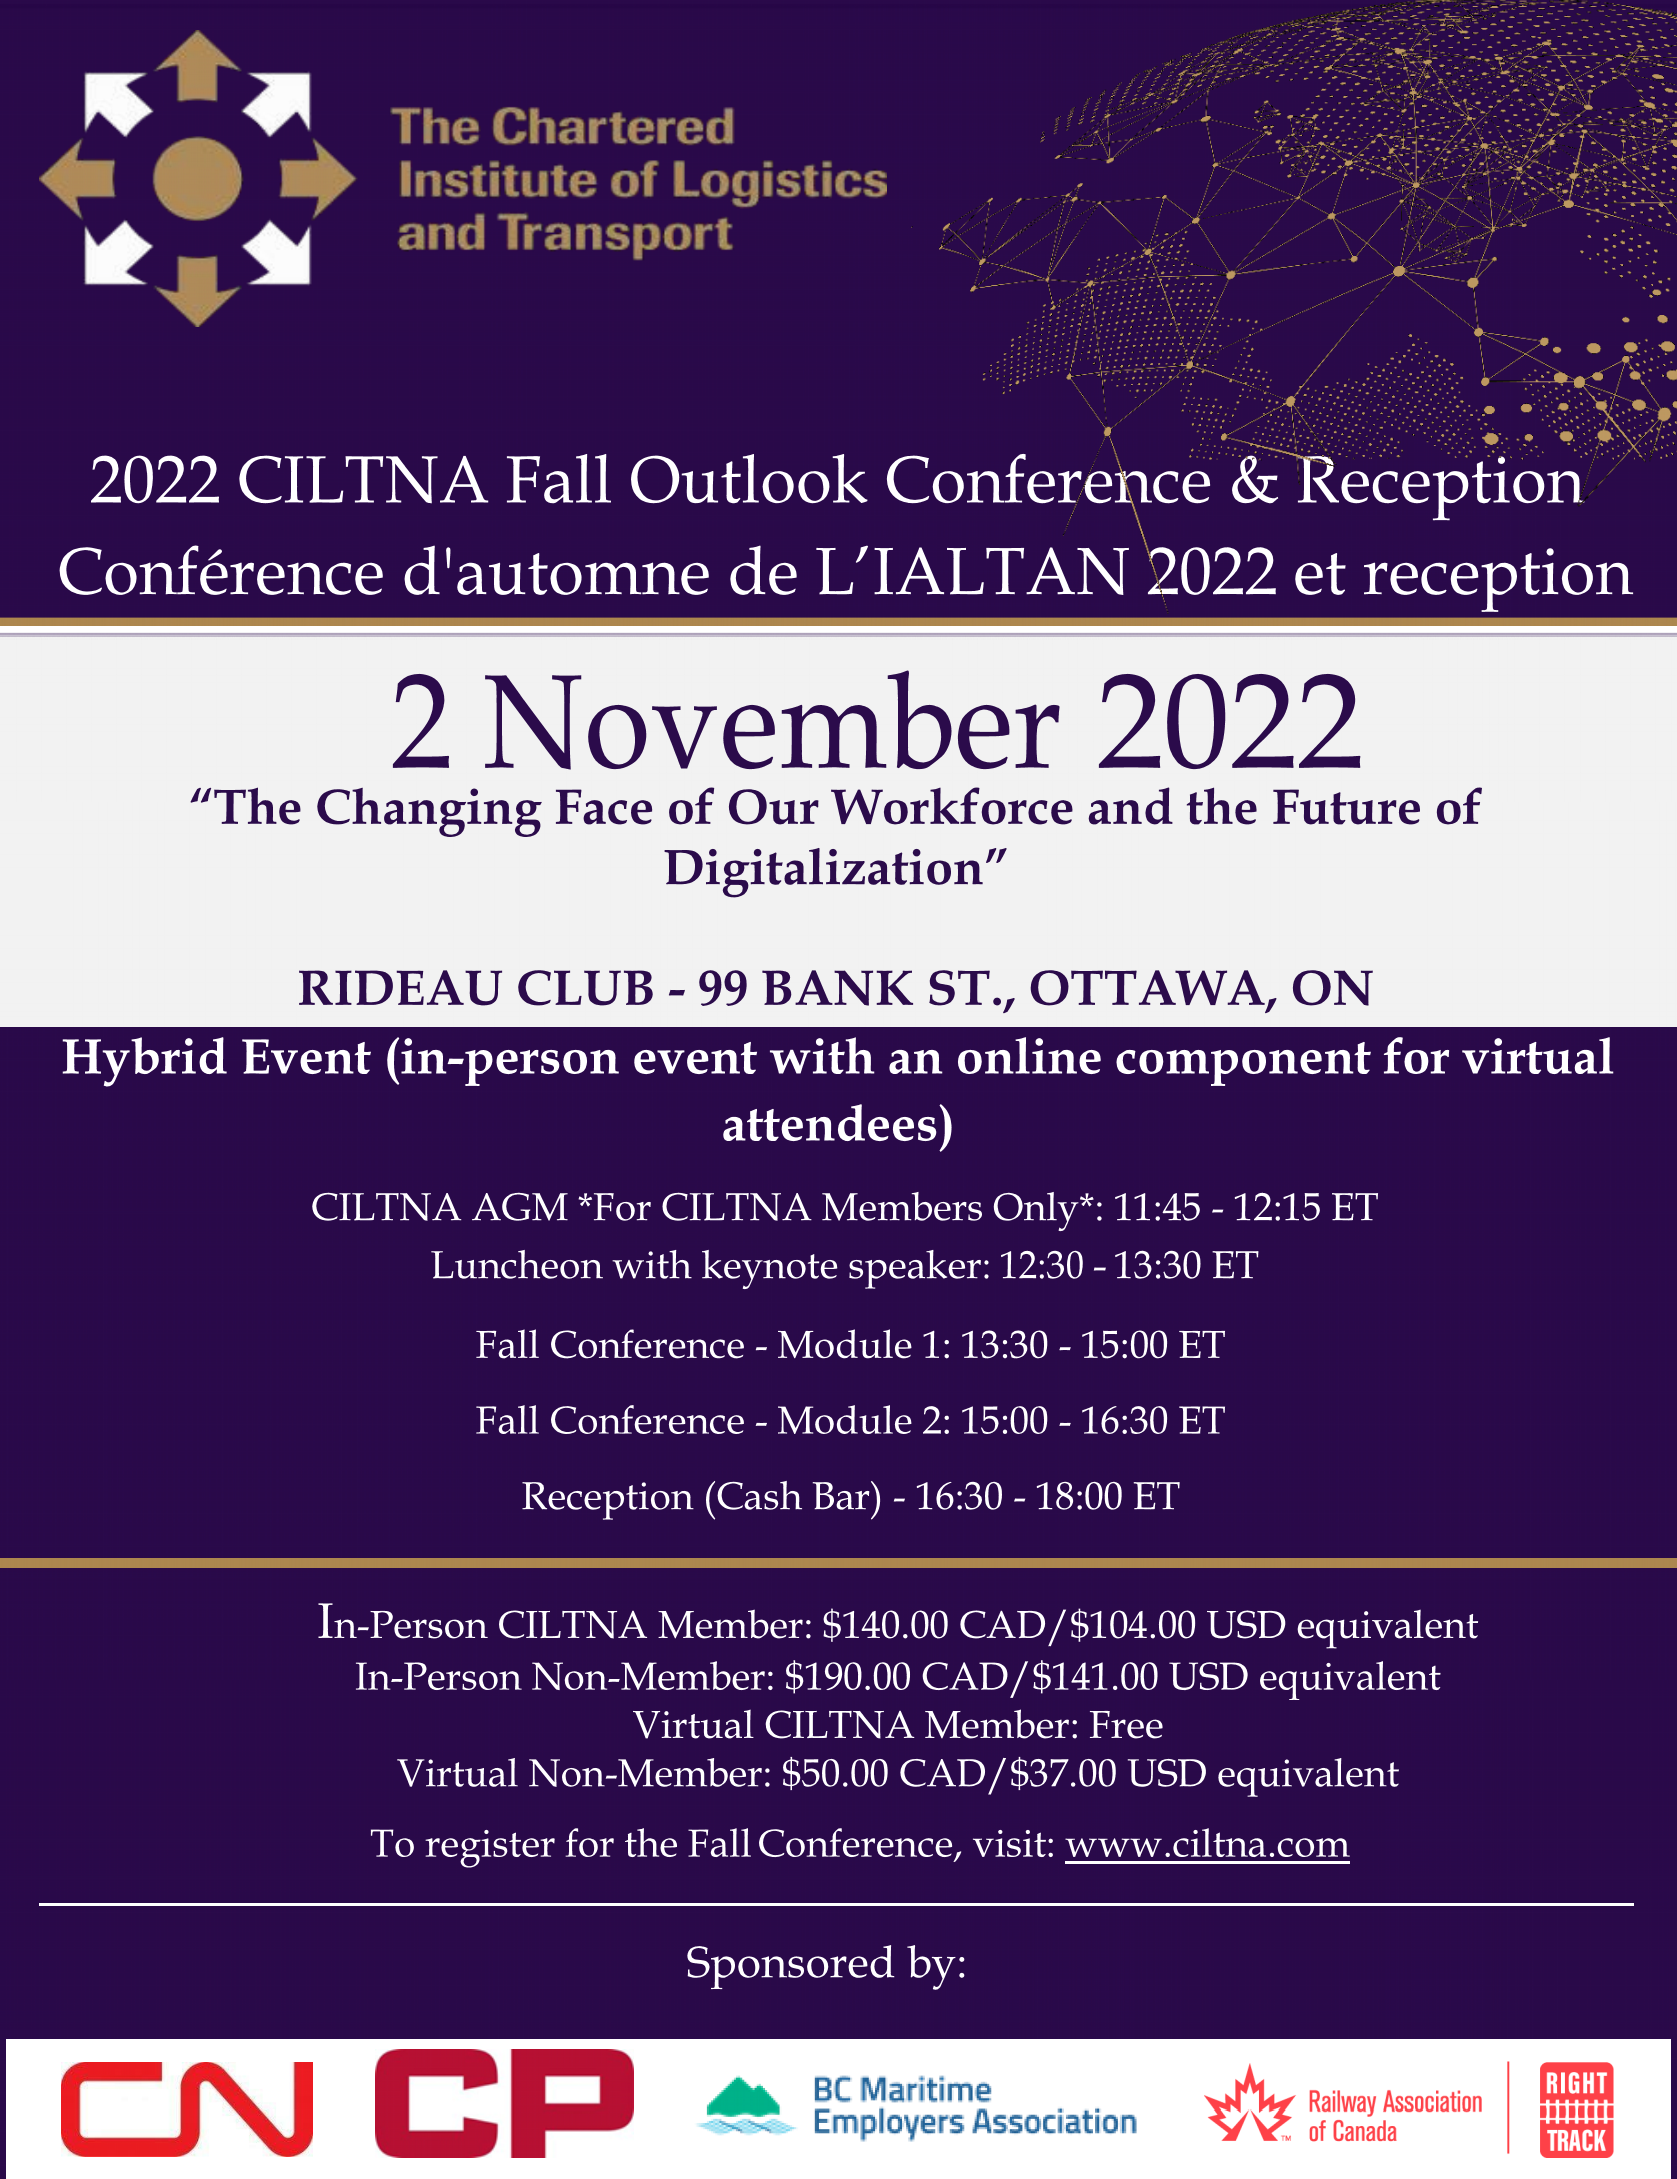 REGISTER NOW! - 2022 CILTNA Hybrid Fall Outlook Conference & Reception: The Changing Face of Our Workforce and the Future of Digitalization